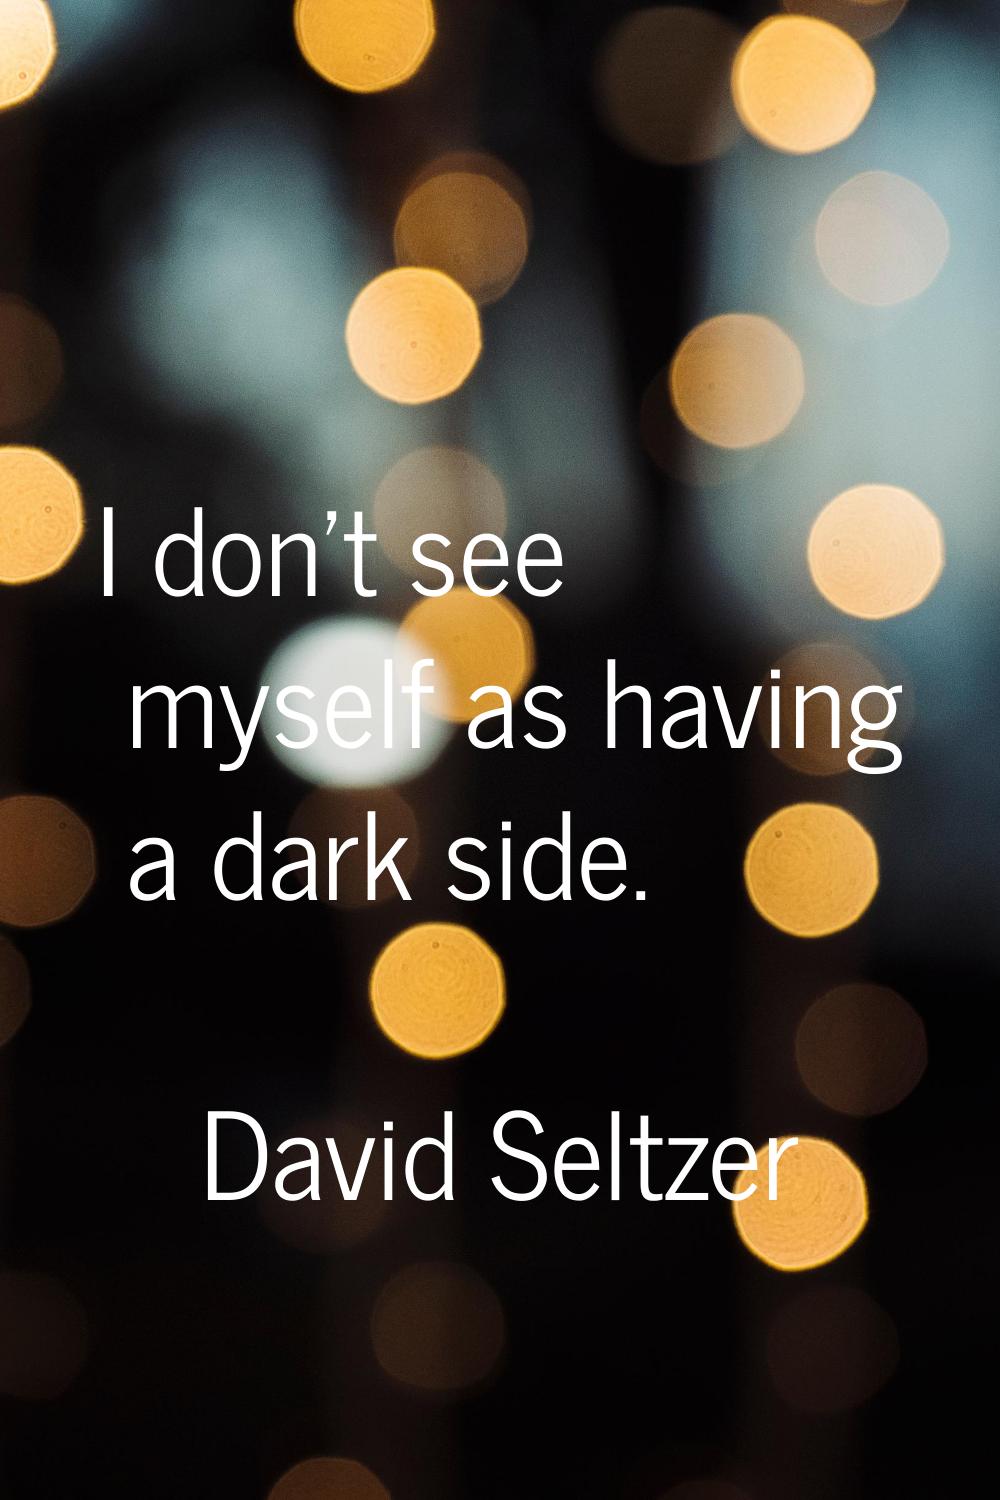 I don't see myself as having a dark side.